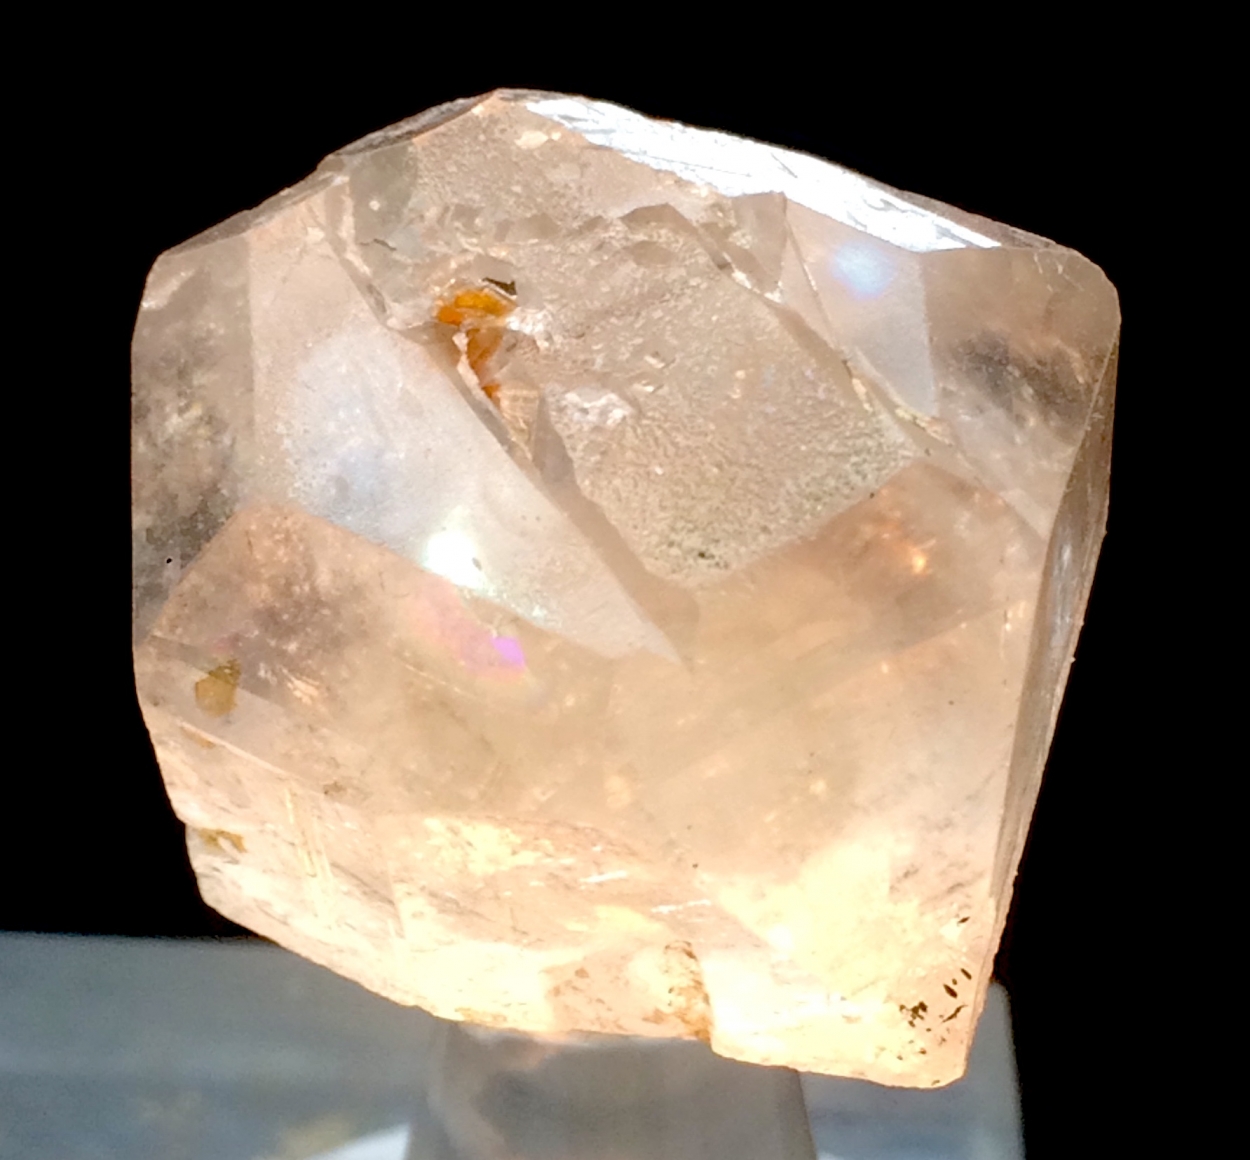 Topaz With Mica Inclusions